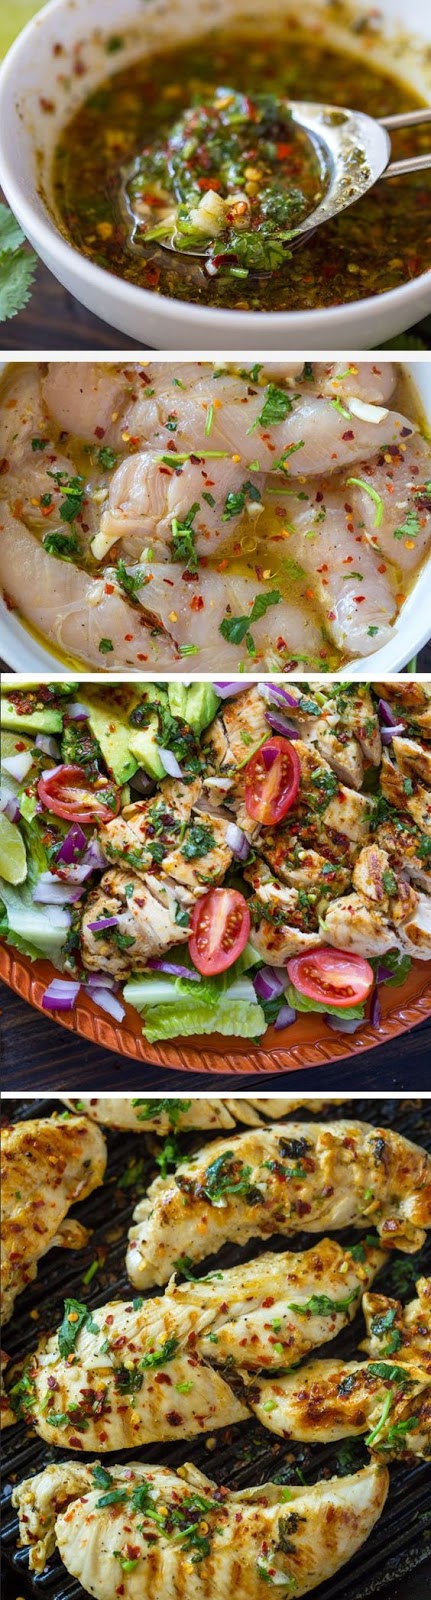 If you will be making this chicken for a salad, double the marinade and reserve half for the dressing. Be sure to reserve it before adding the marinade to the chicken in order to avoid contamination.